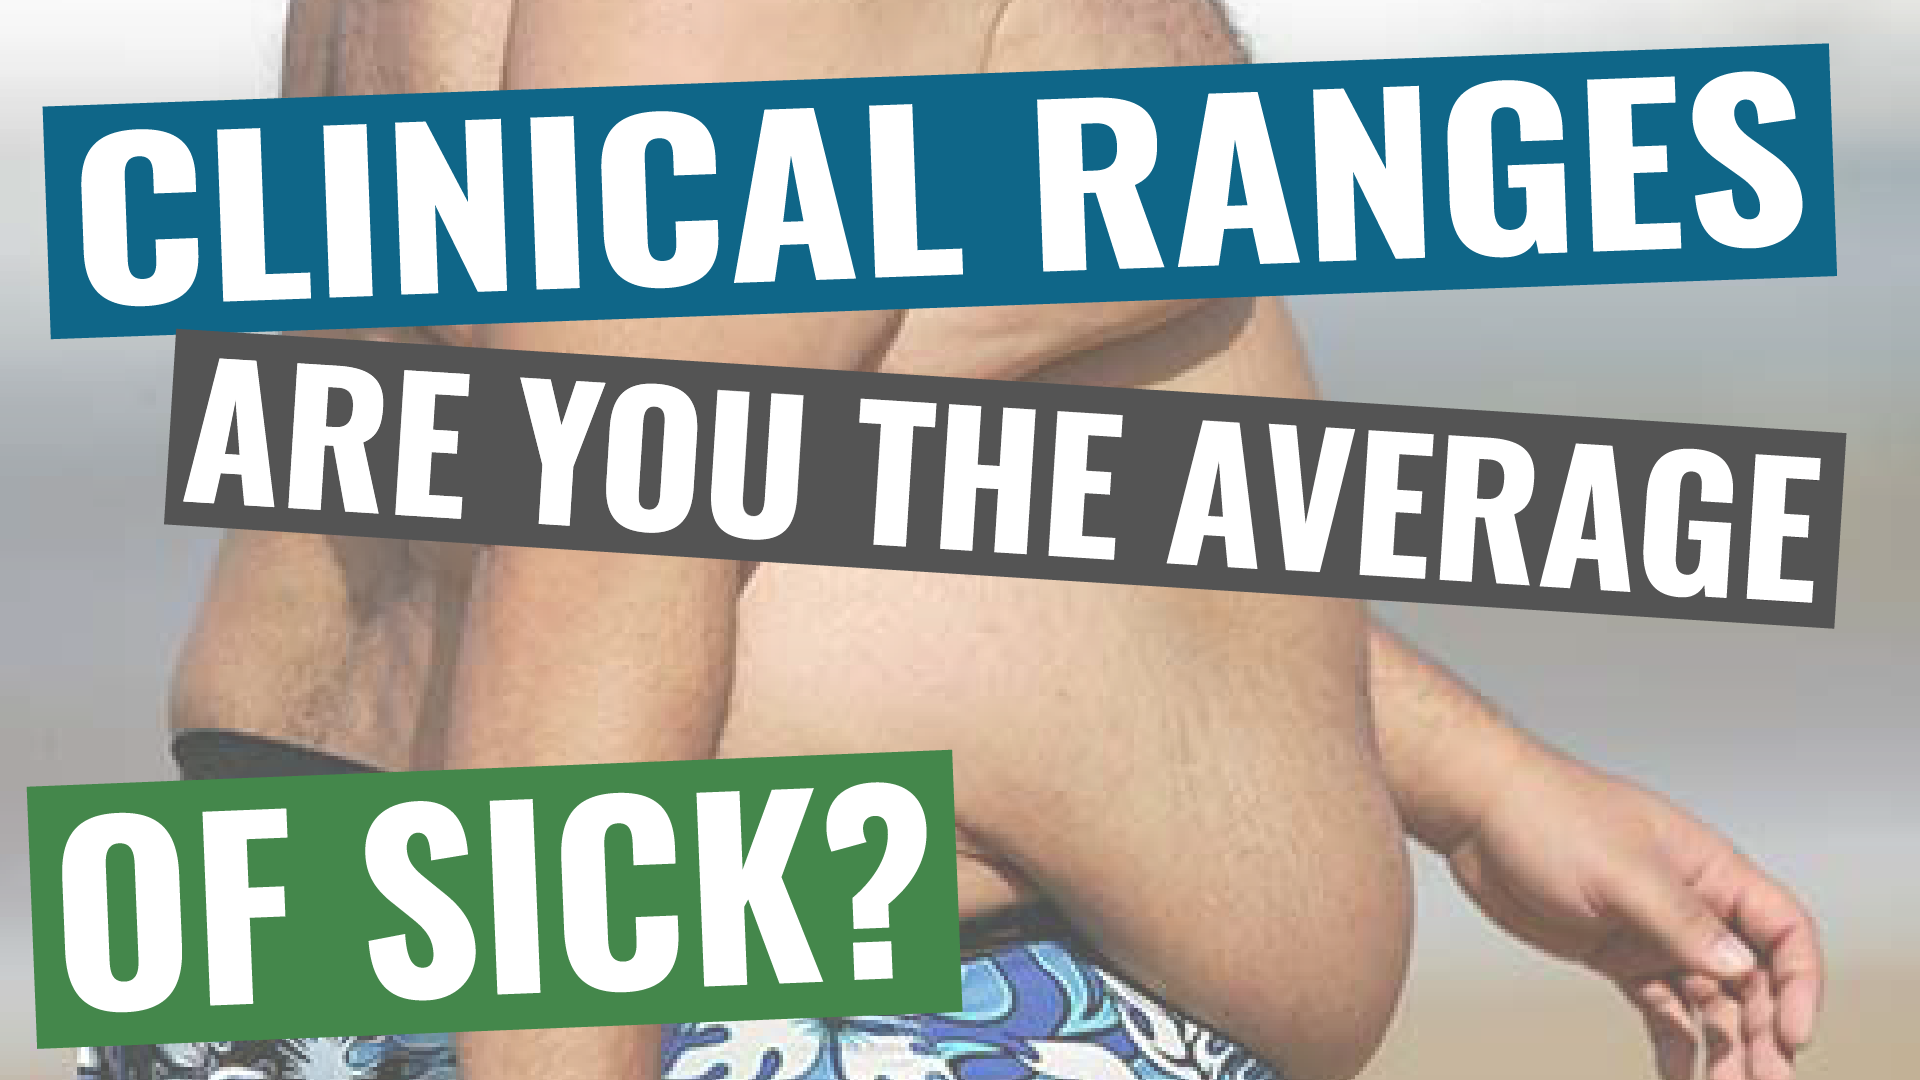 005 – Clinical Ranges: Are you the average of sick?